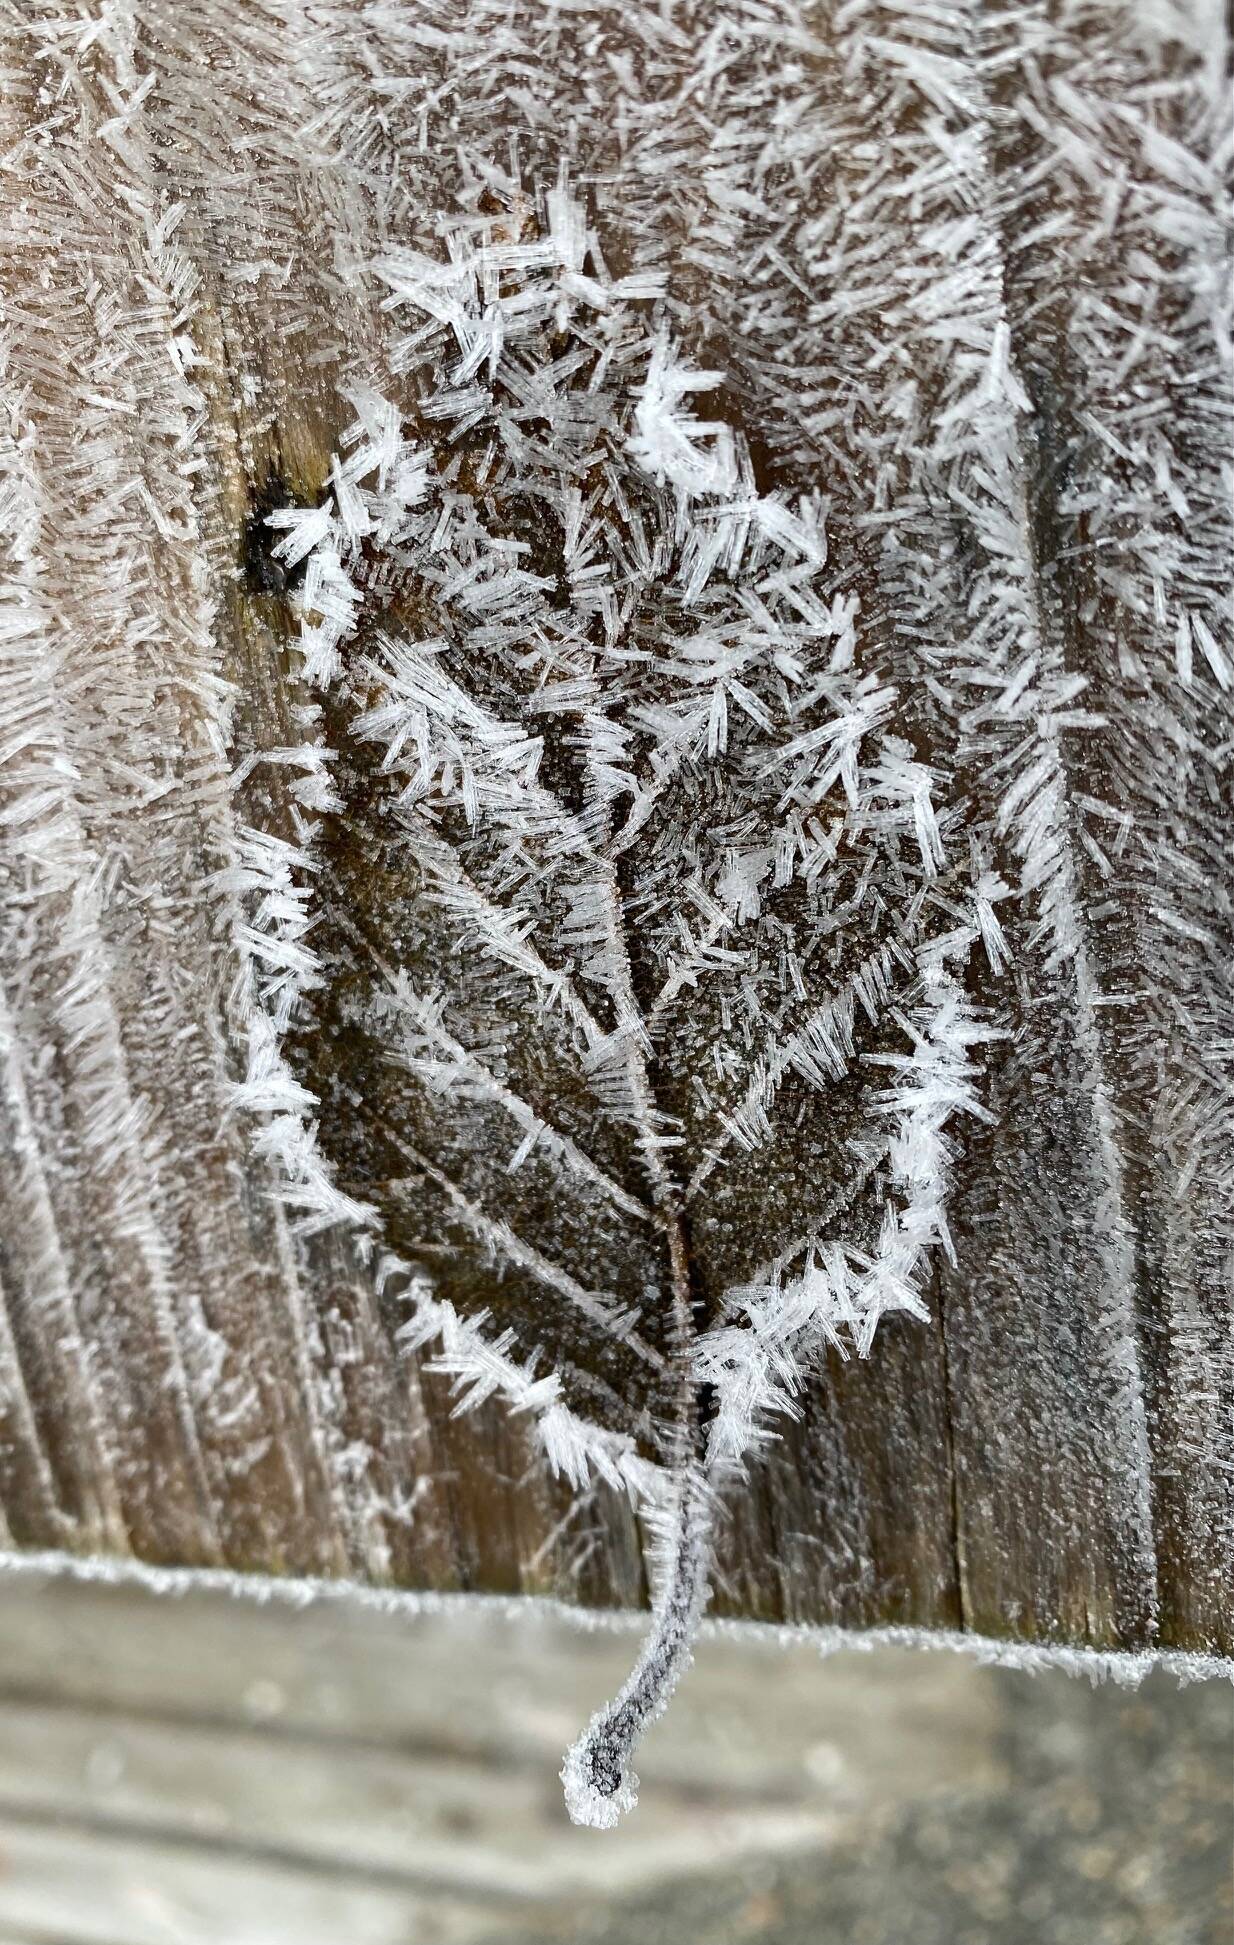 The outline and veins of this leaf are etched in hoarfrost on East Glacier Trail on Nov 29. (Photo by Denise Carroll)